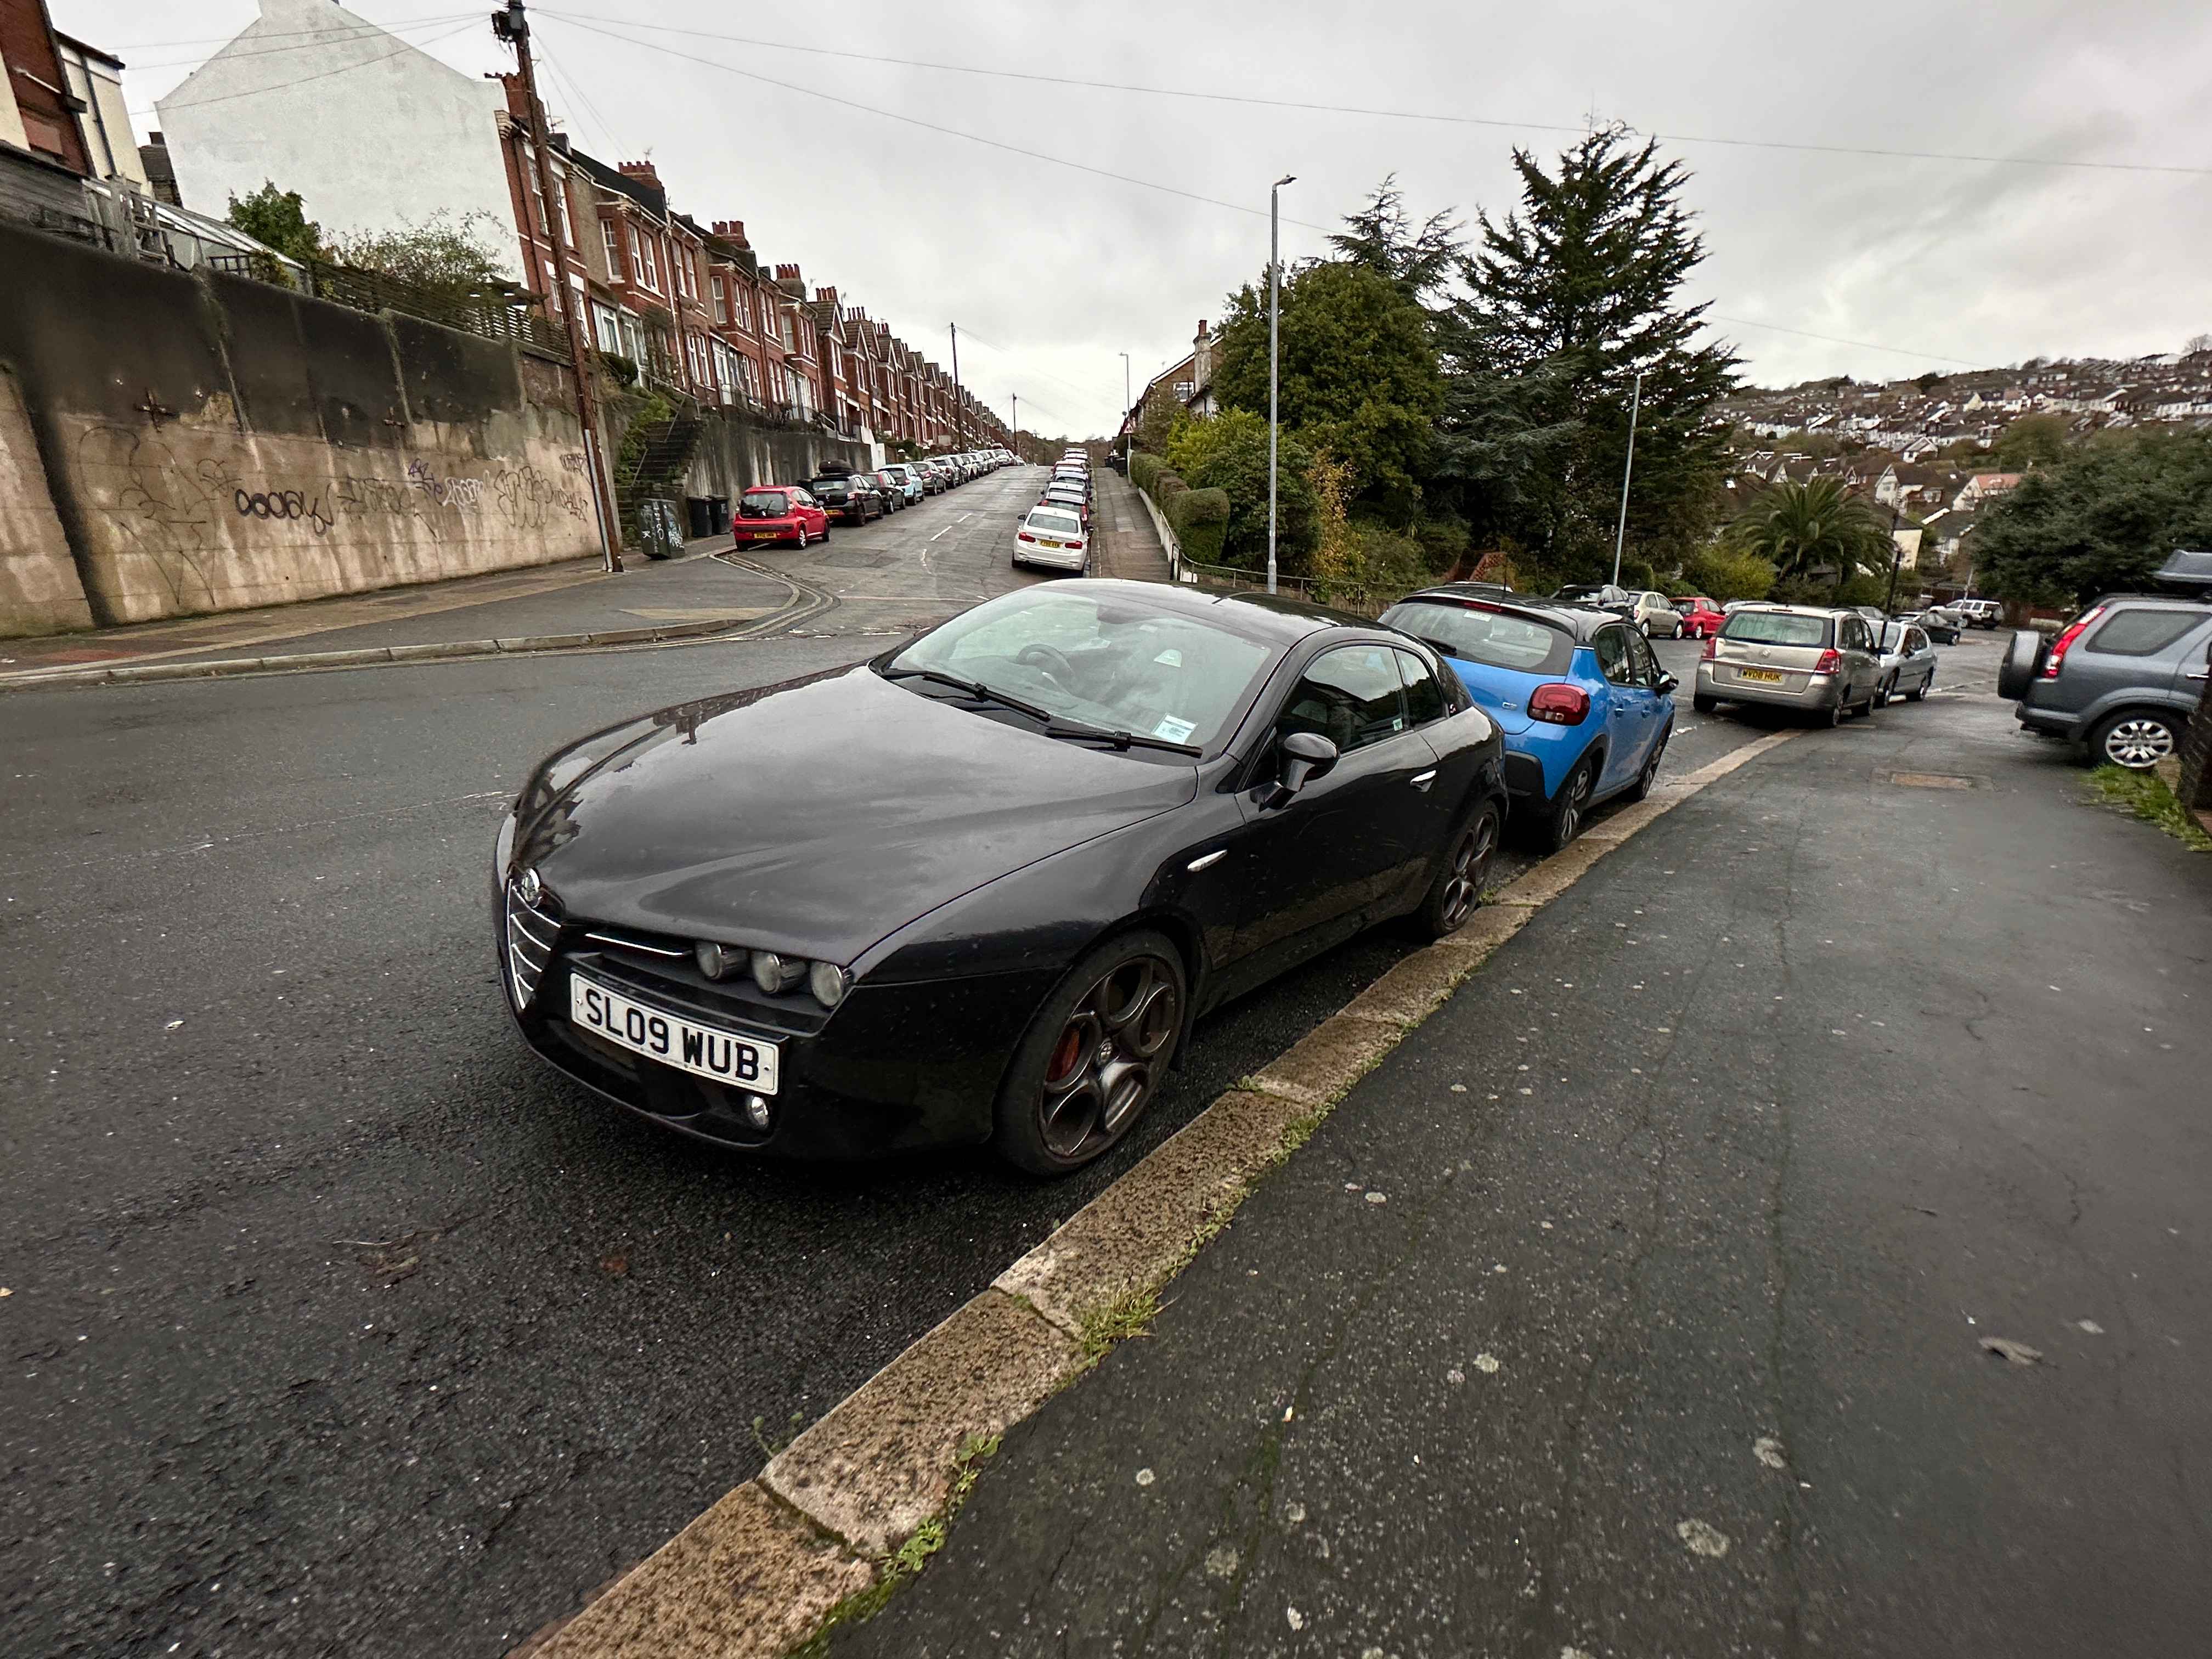 Photograph of SL09 WUB - a Black Alfa Romeo Brera parked in Hollingdean by a non-resident. The twelfth of twenty photographs supplied by the residents of Hollingdean.